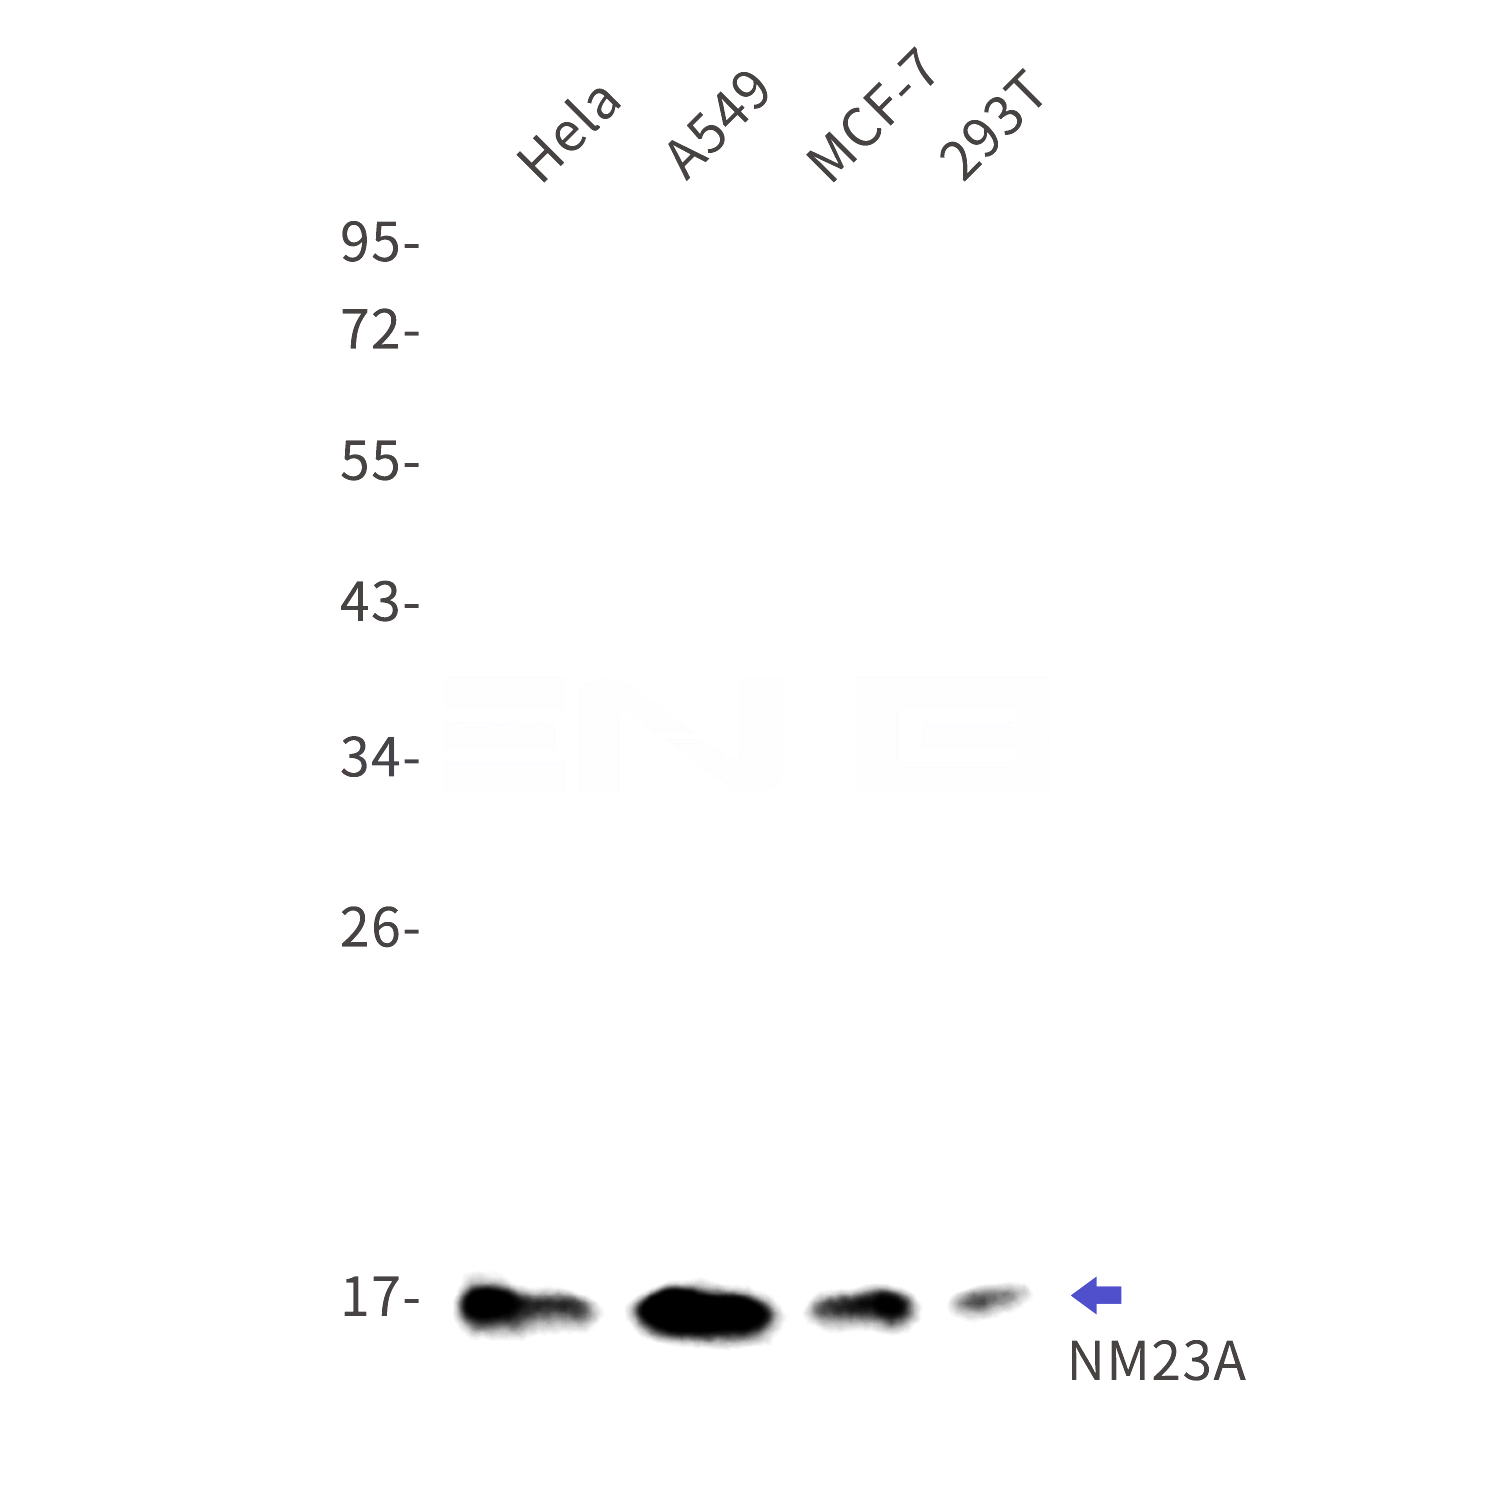 Western blot detection of NM23A in Hela,A549,MCF-7,293T cell lysates using NM23A Rabbit mAb(1:1000 diluted).Predicted band size:17kDa.Observed band size:17kDa.